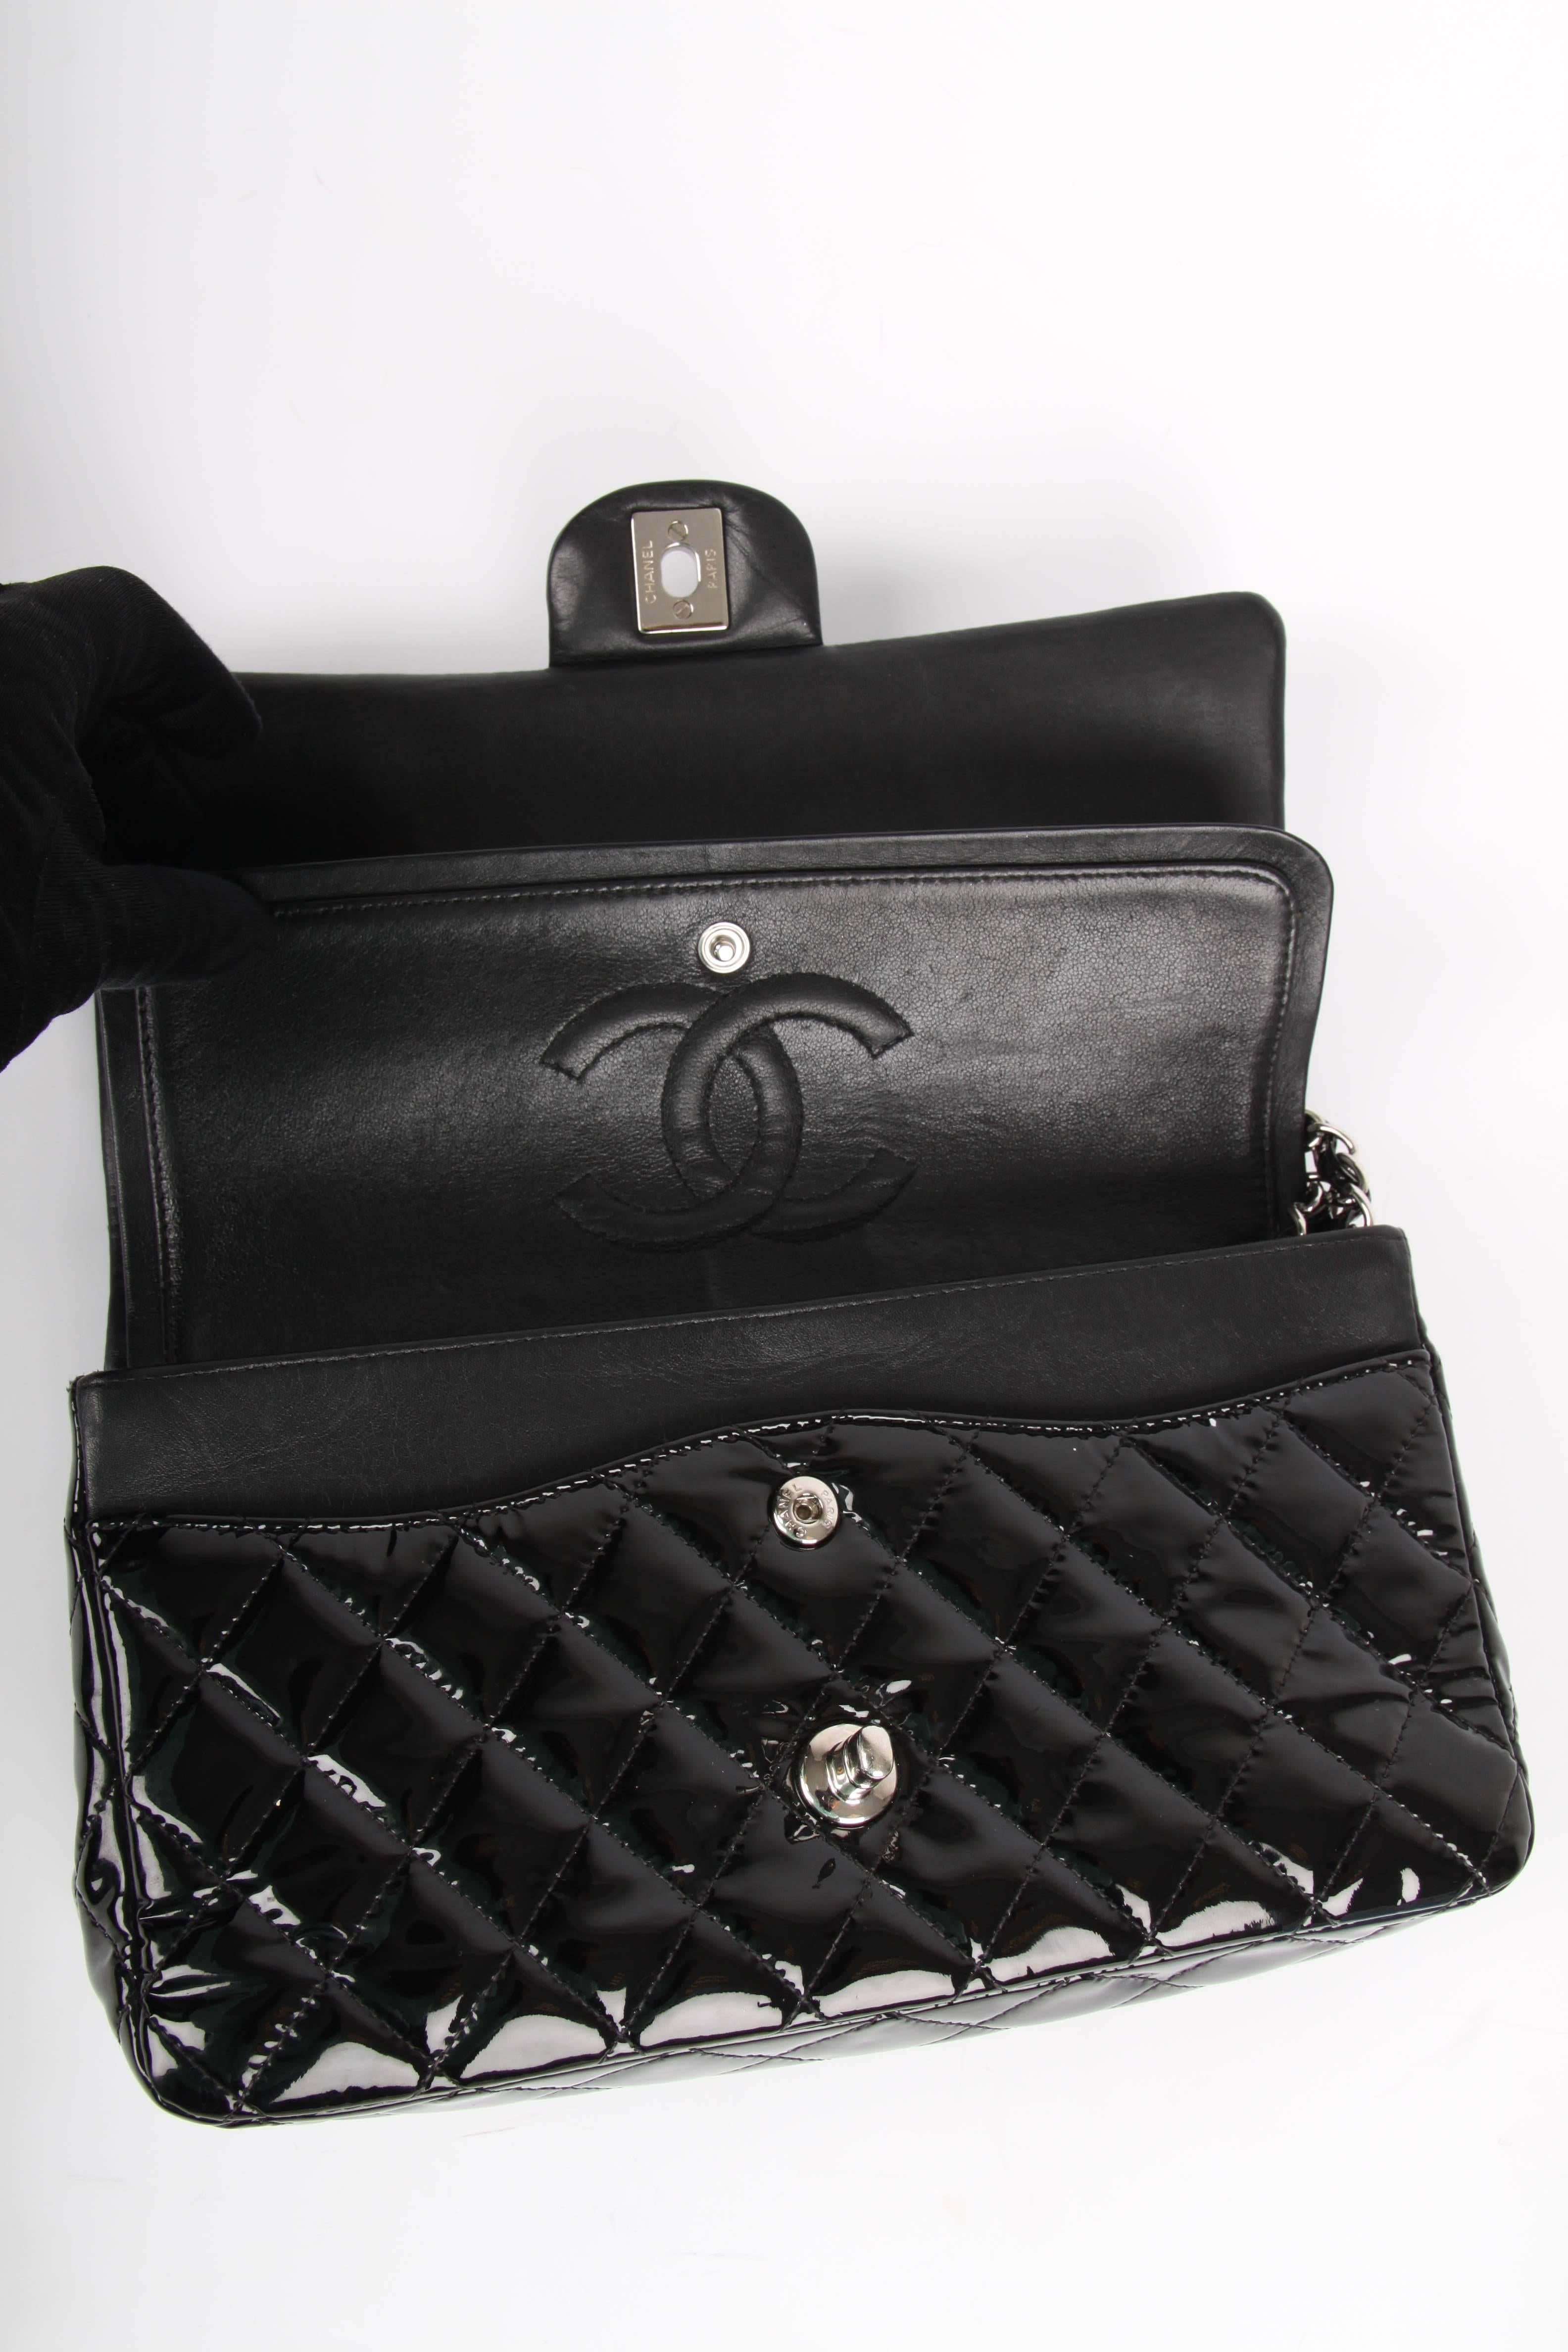 Black Chanel 2.55 Timeless Medium Double Flap Bag Patent Leather - black For Sale